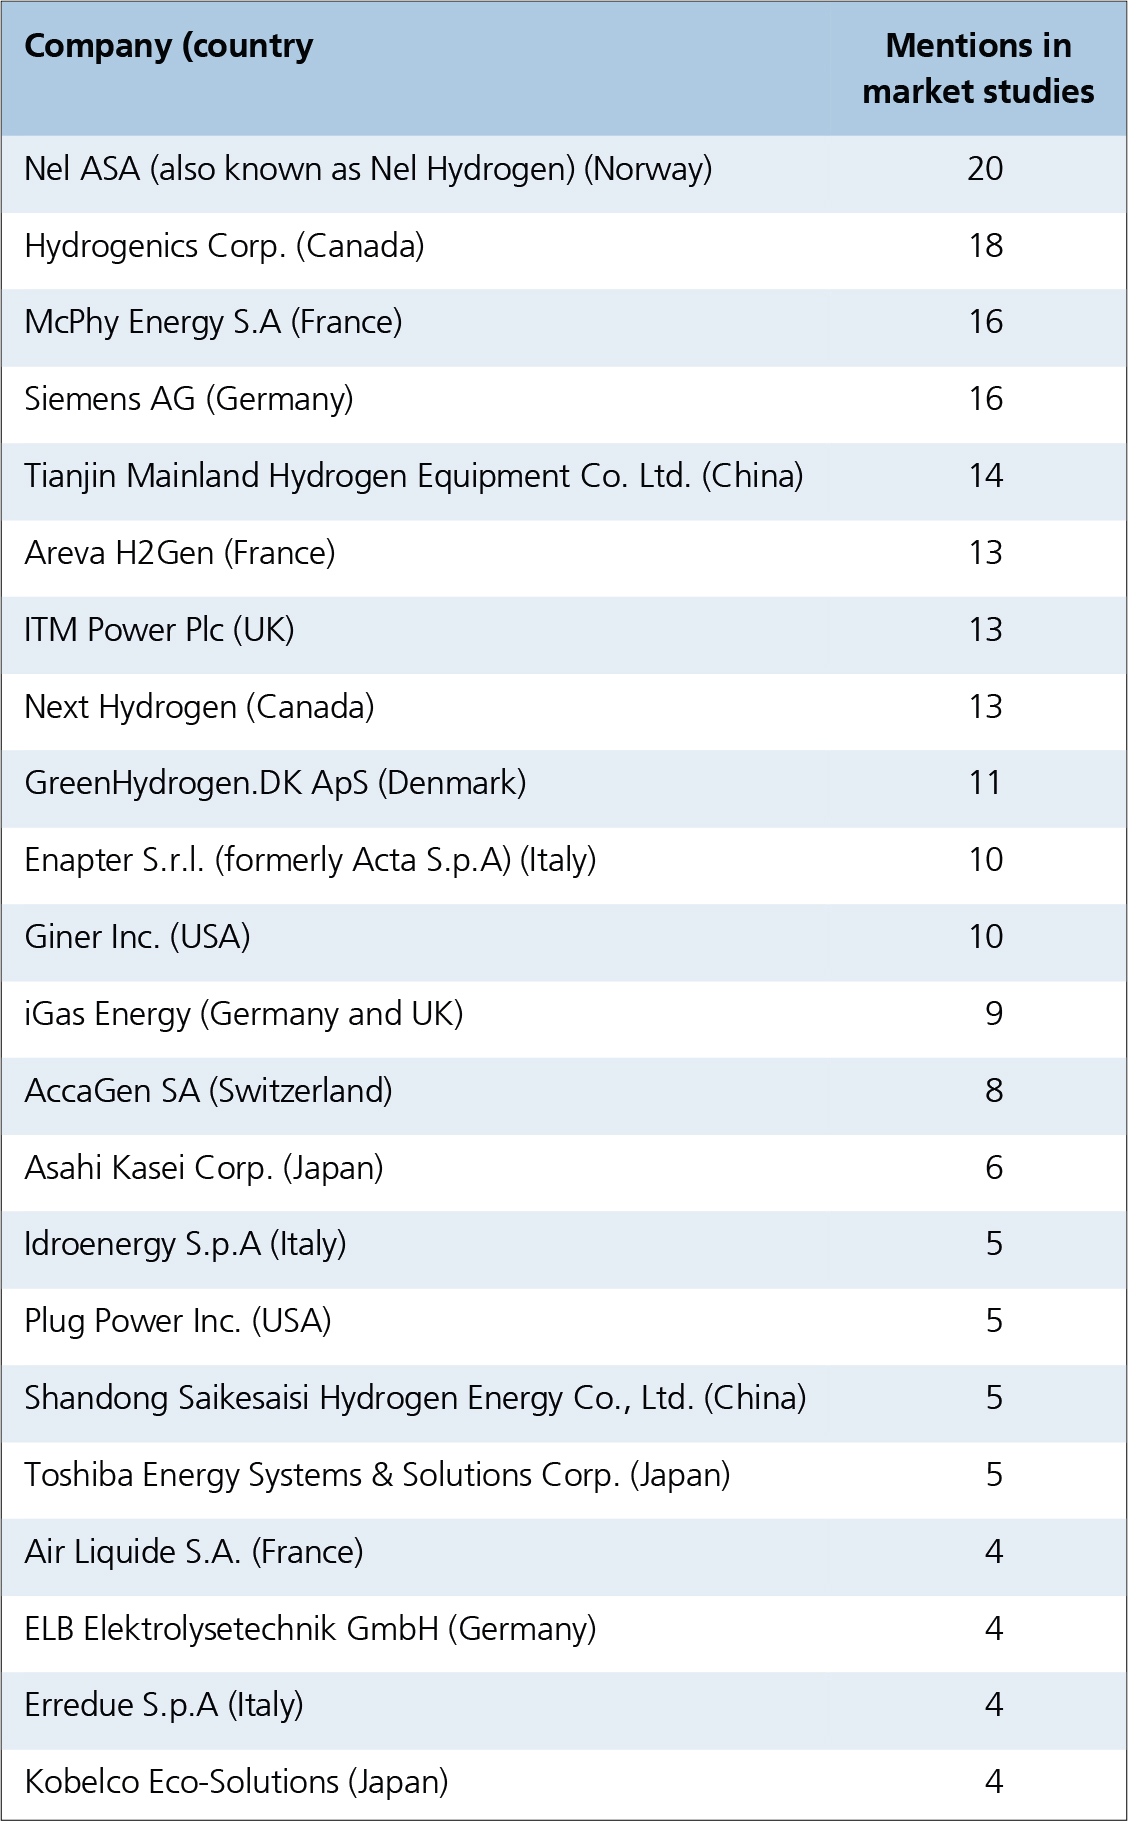 Table 1: Companies that are mentioned in the analysed market studies.